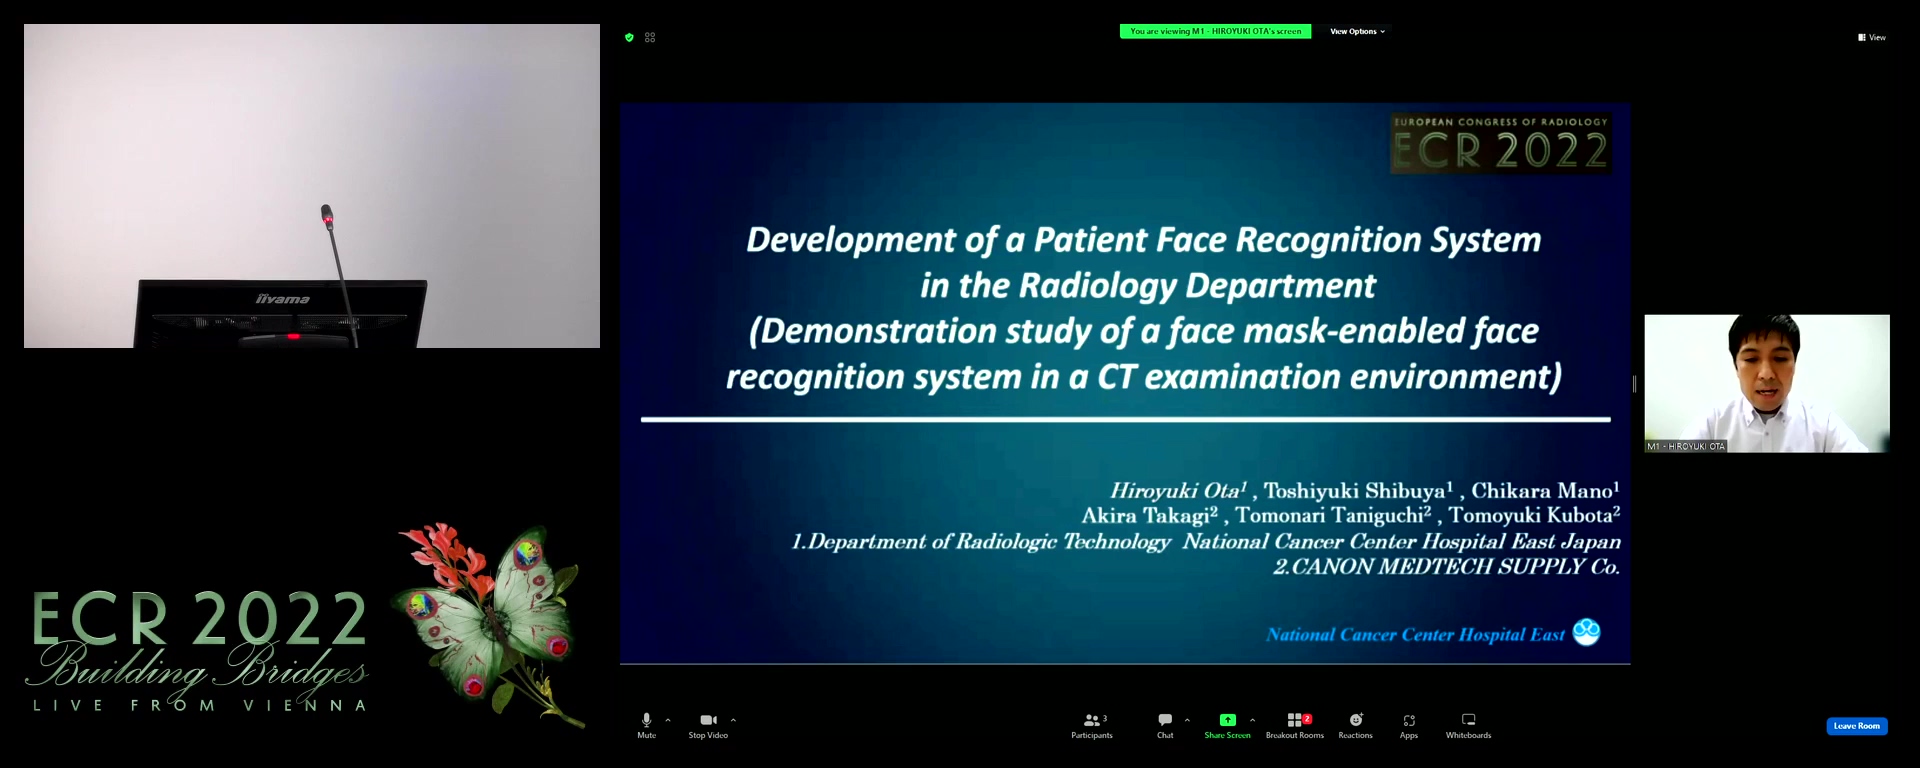 Development of a patient face recognition system in the radiology department (demonstration study of a face mask-enabled face recognition system in a CT examination environment) - Hiroyuki Ota, Kashiwa,Chiba pref / JP